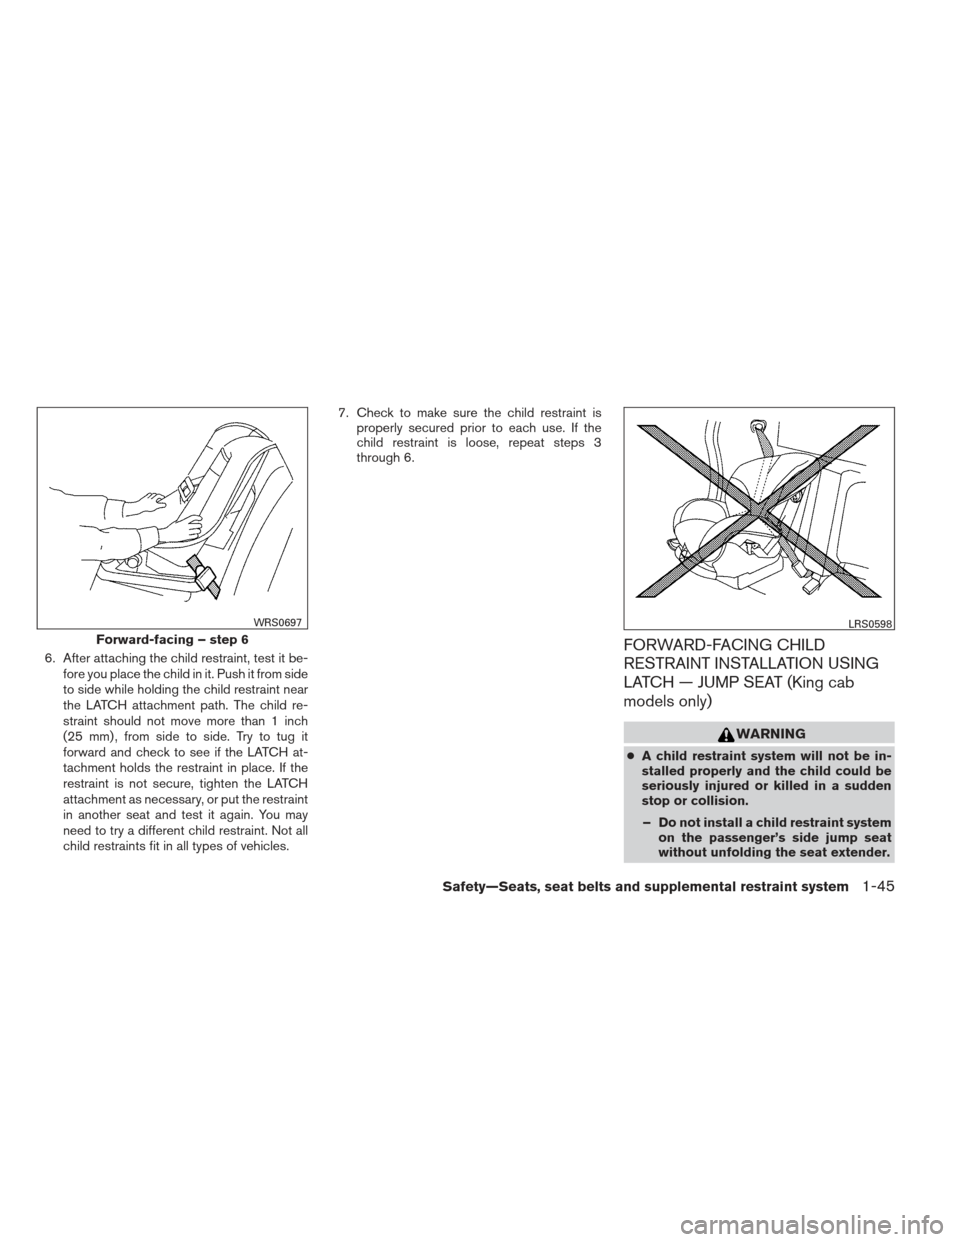 NISSAN FRONTIER 2013 D40 / 2.G Repair Manual 6. After attaching the child restraint, test it be-fore you place the child in it. Push it from side
to side while holding the child restraint near
the LATCH attachment path. The child re-
straint sho